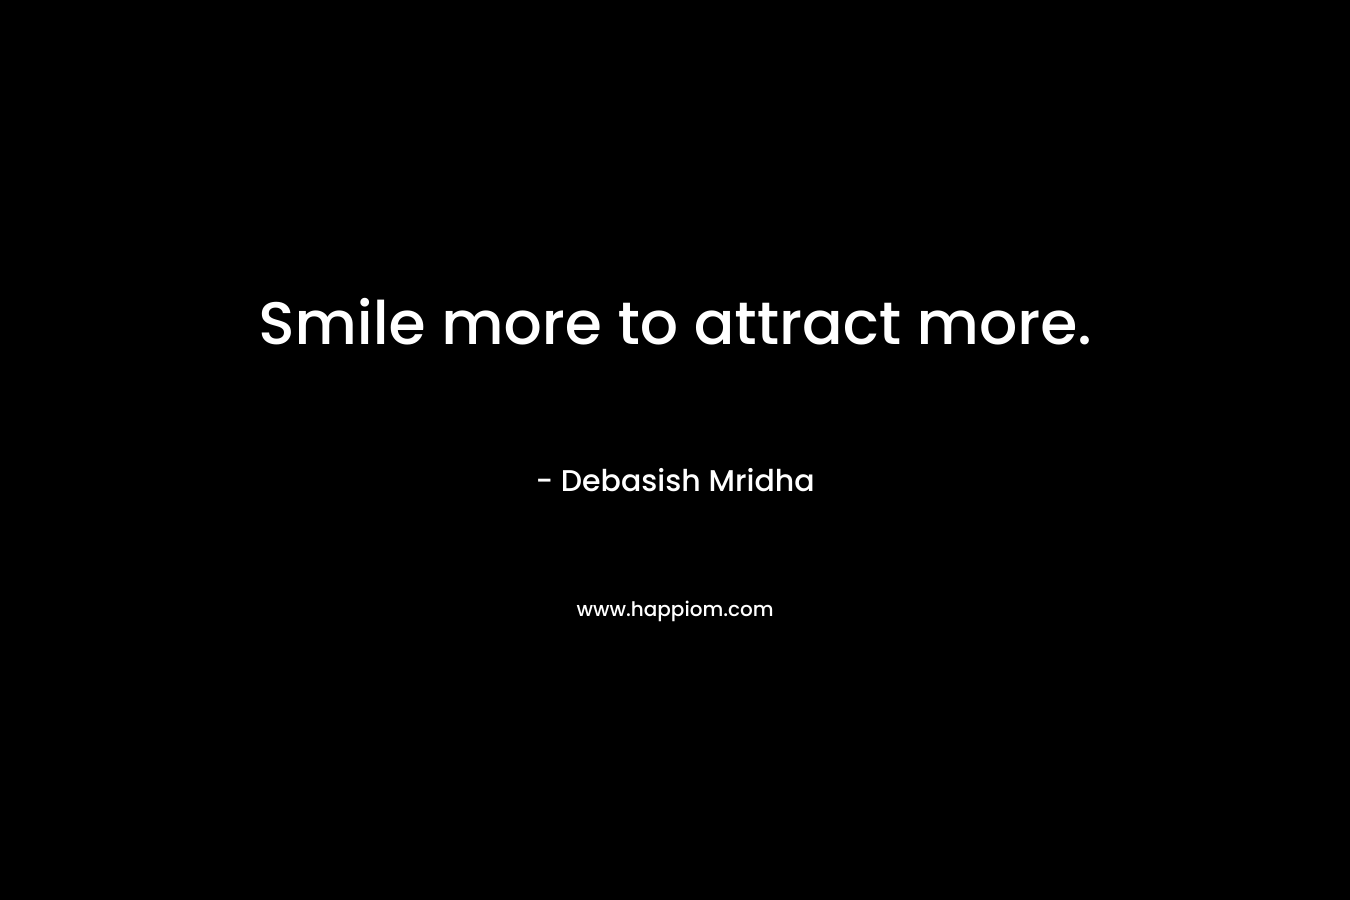 Smile more to attract more.